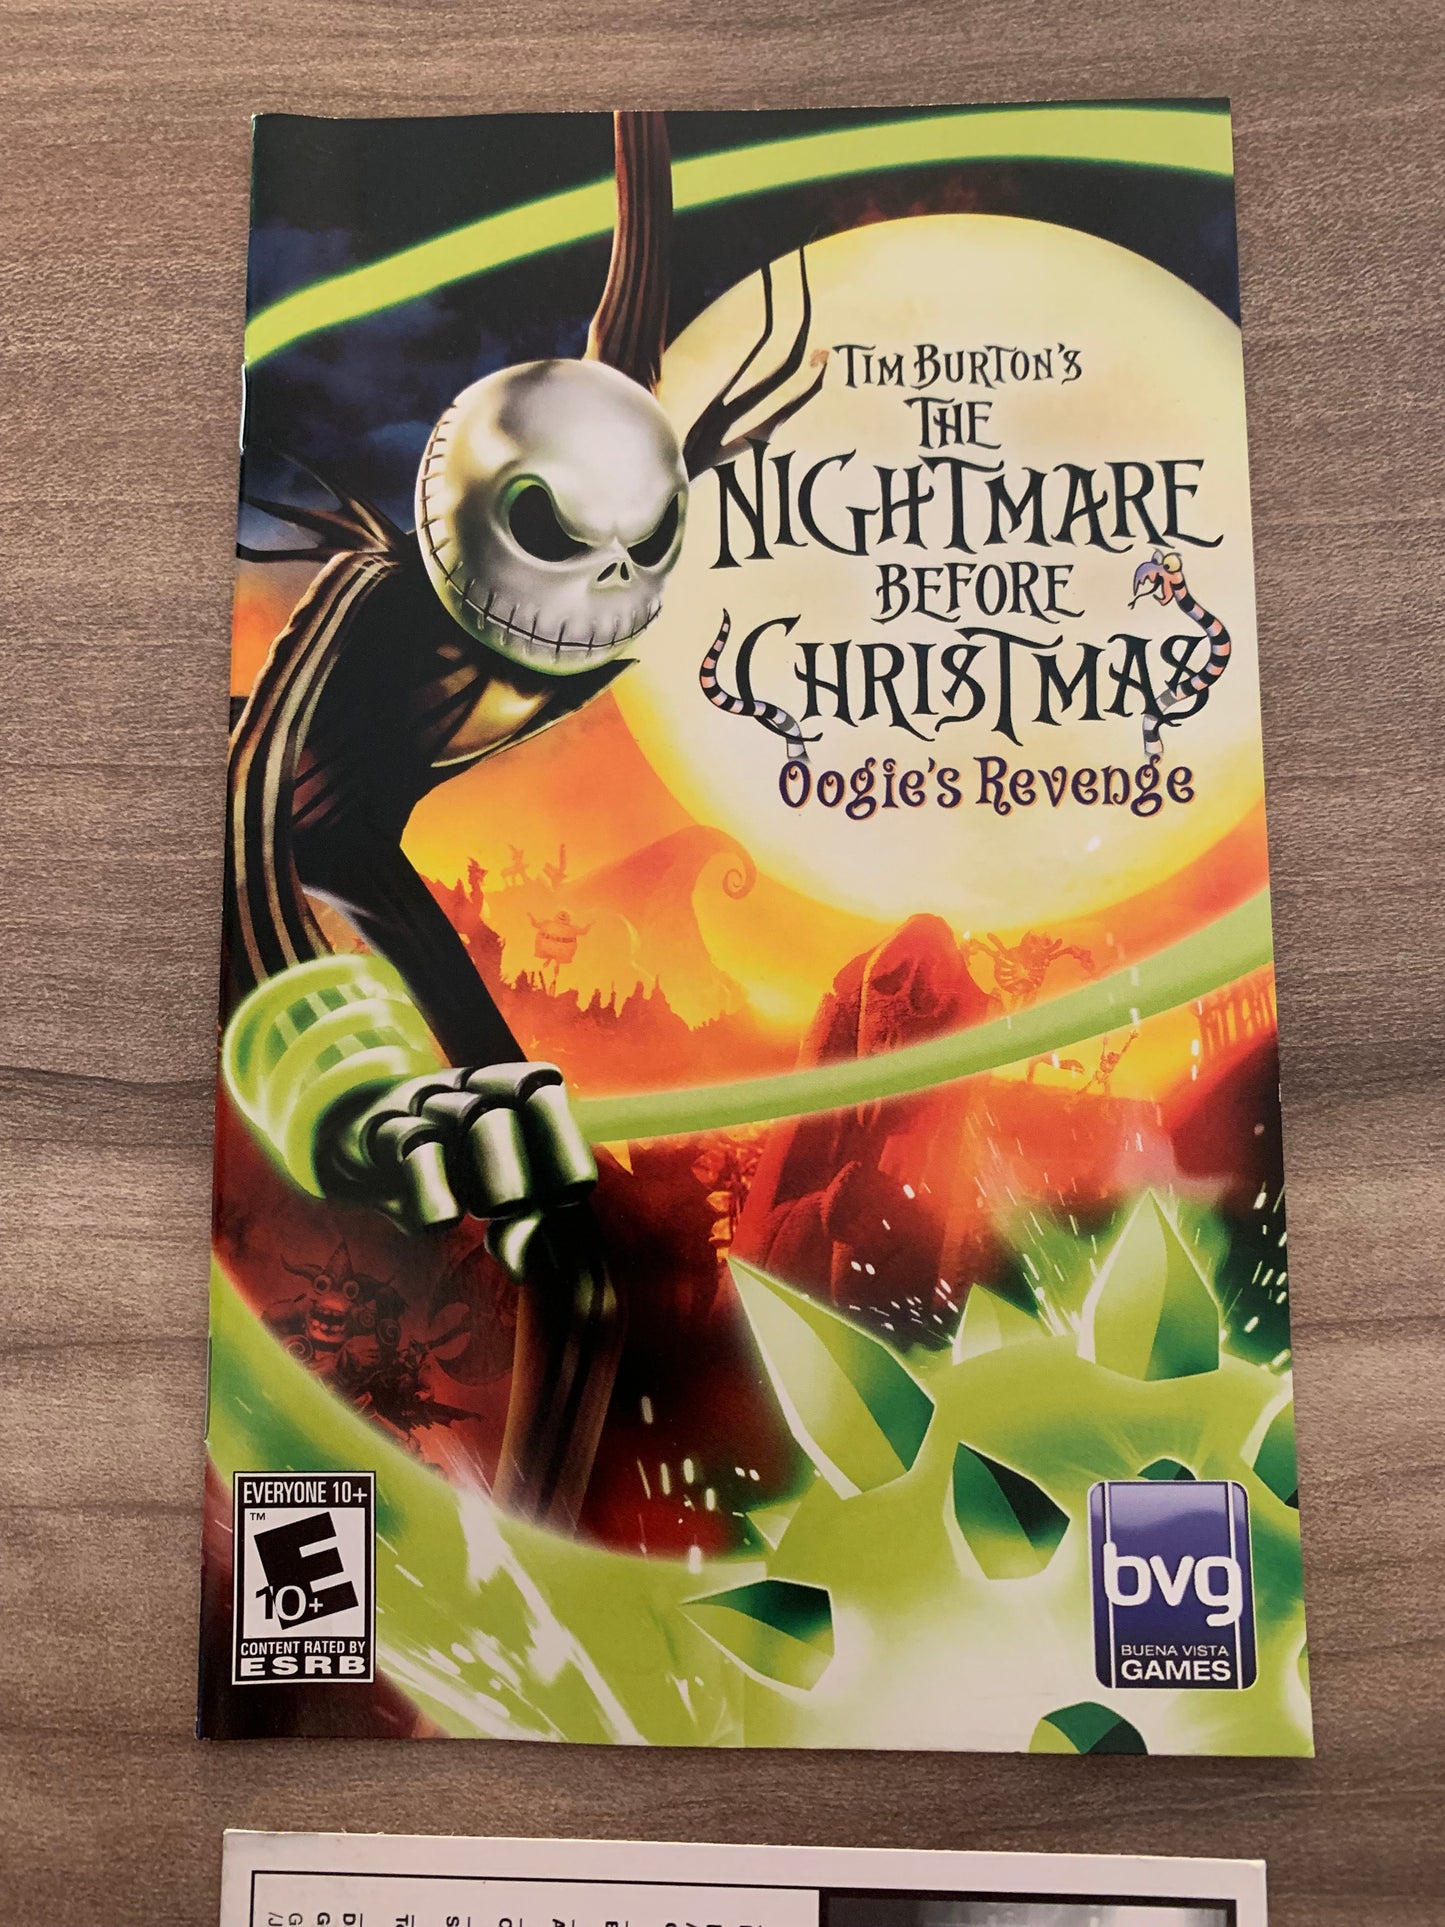 SONY PLAYSTATiON 2 [PS2] | TiM BURTONS THE NiGHTMARE BEFORE CHRiSTMAS OOGiES REVENGE